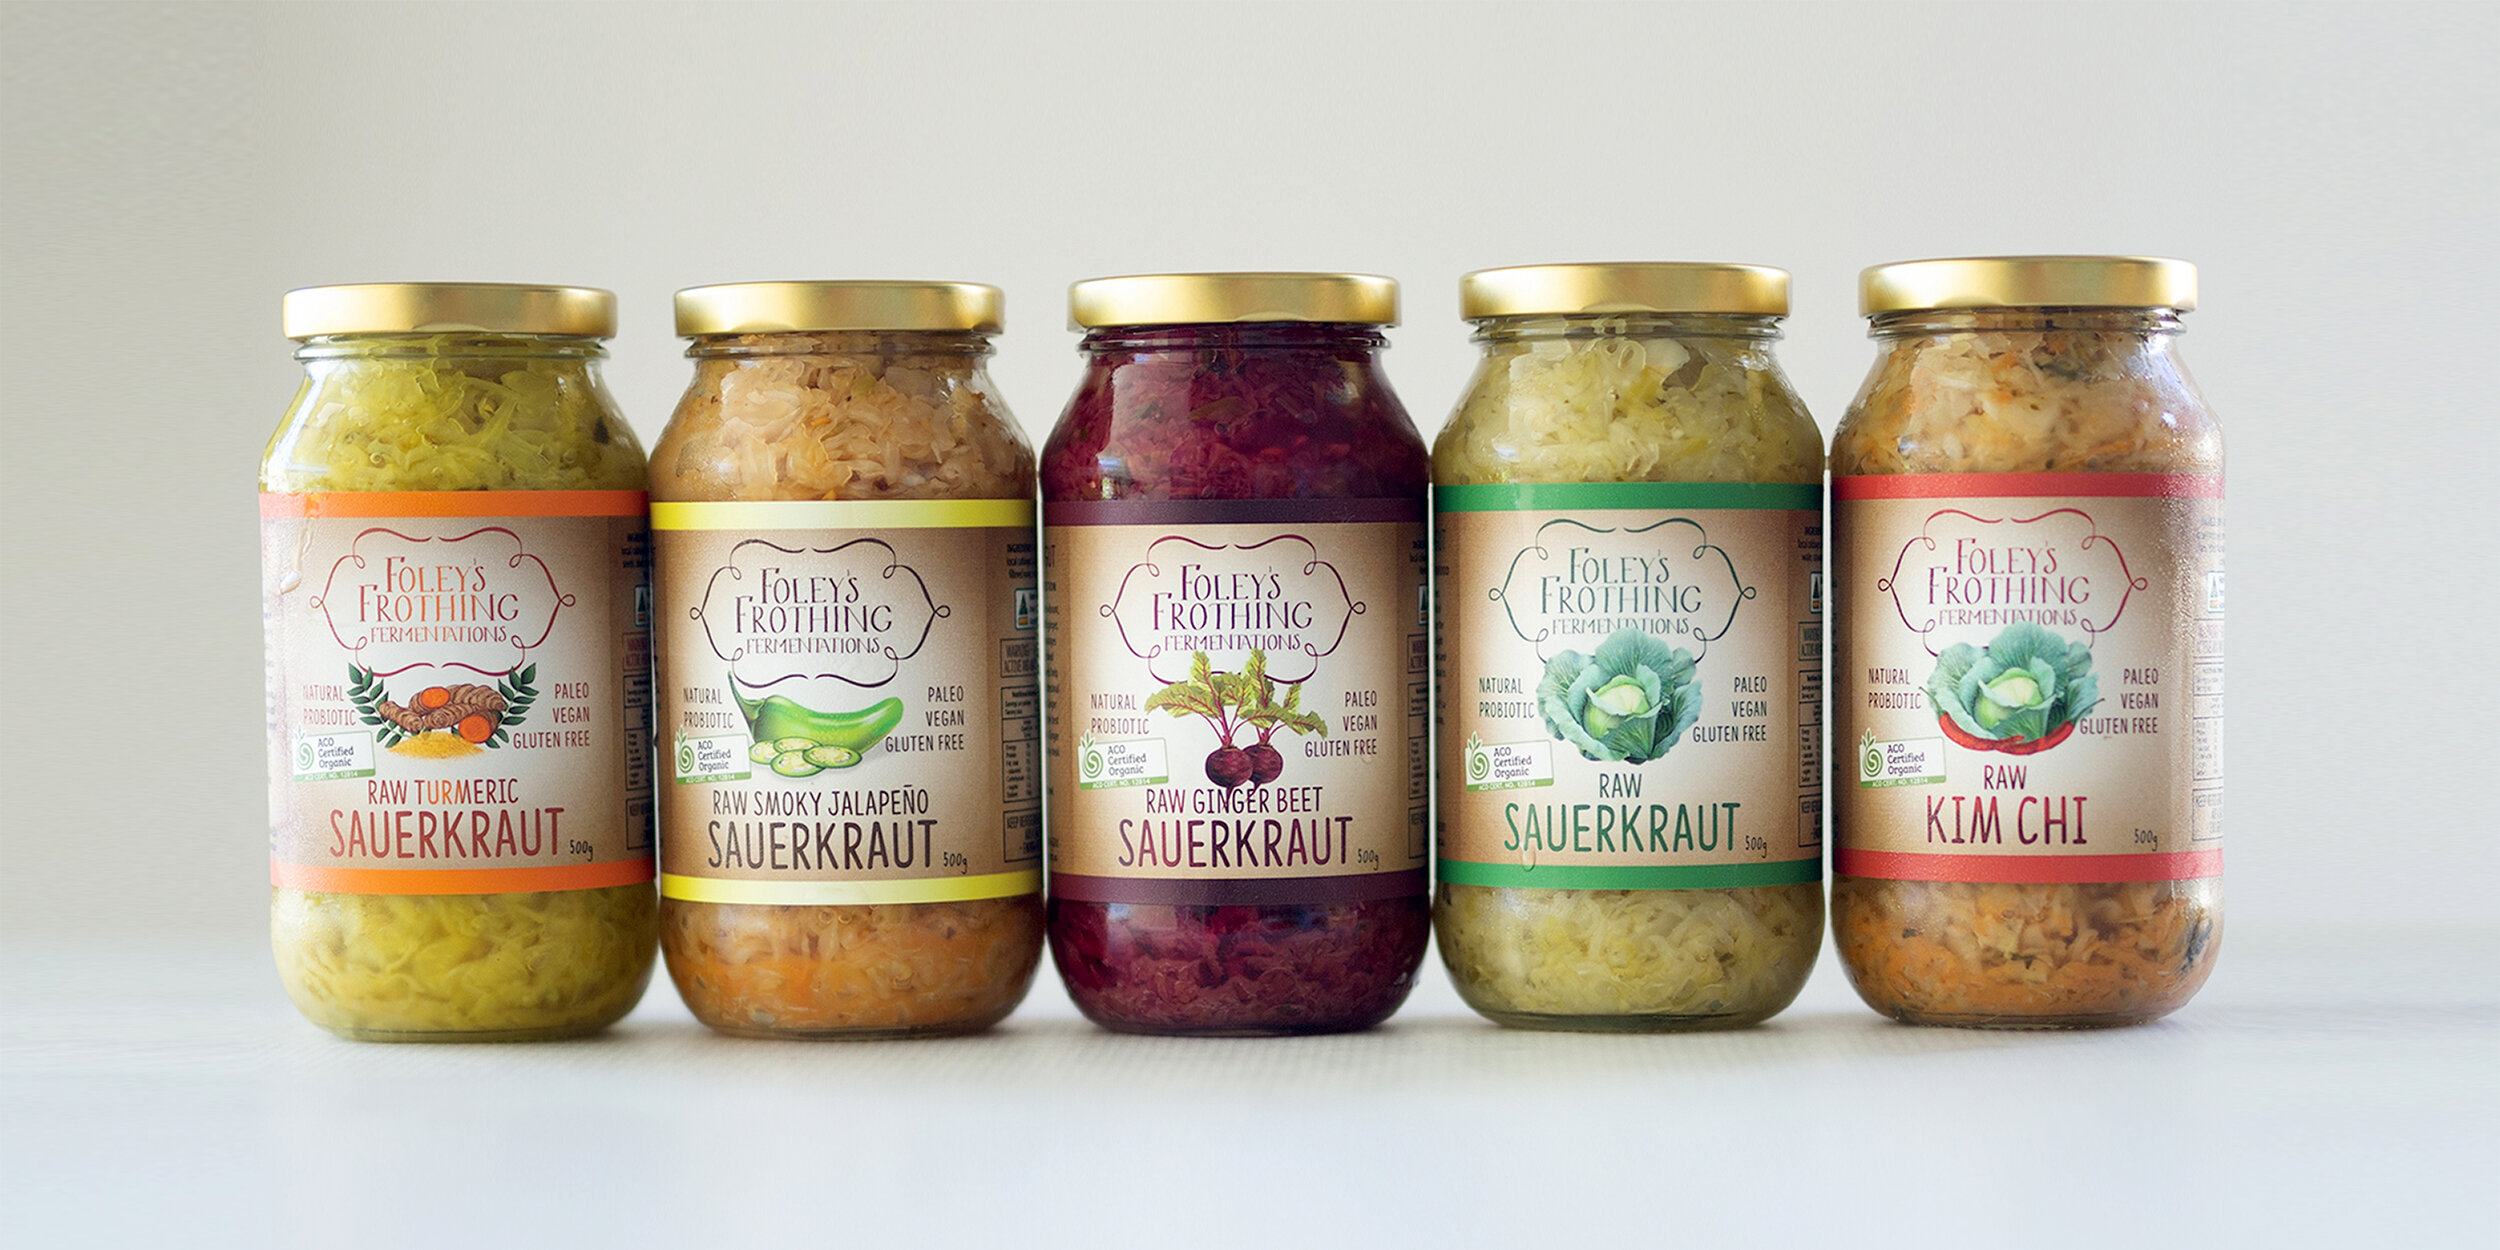 BUY ONLINE - Raw Fermented Foods - Gut Health, Probiotic Sauerkrauts and Kim Chi — Foley's Frothing Fermentations